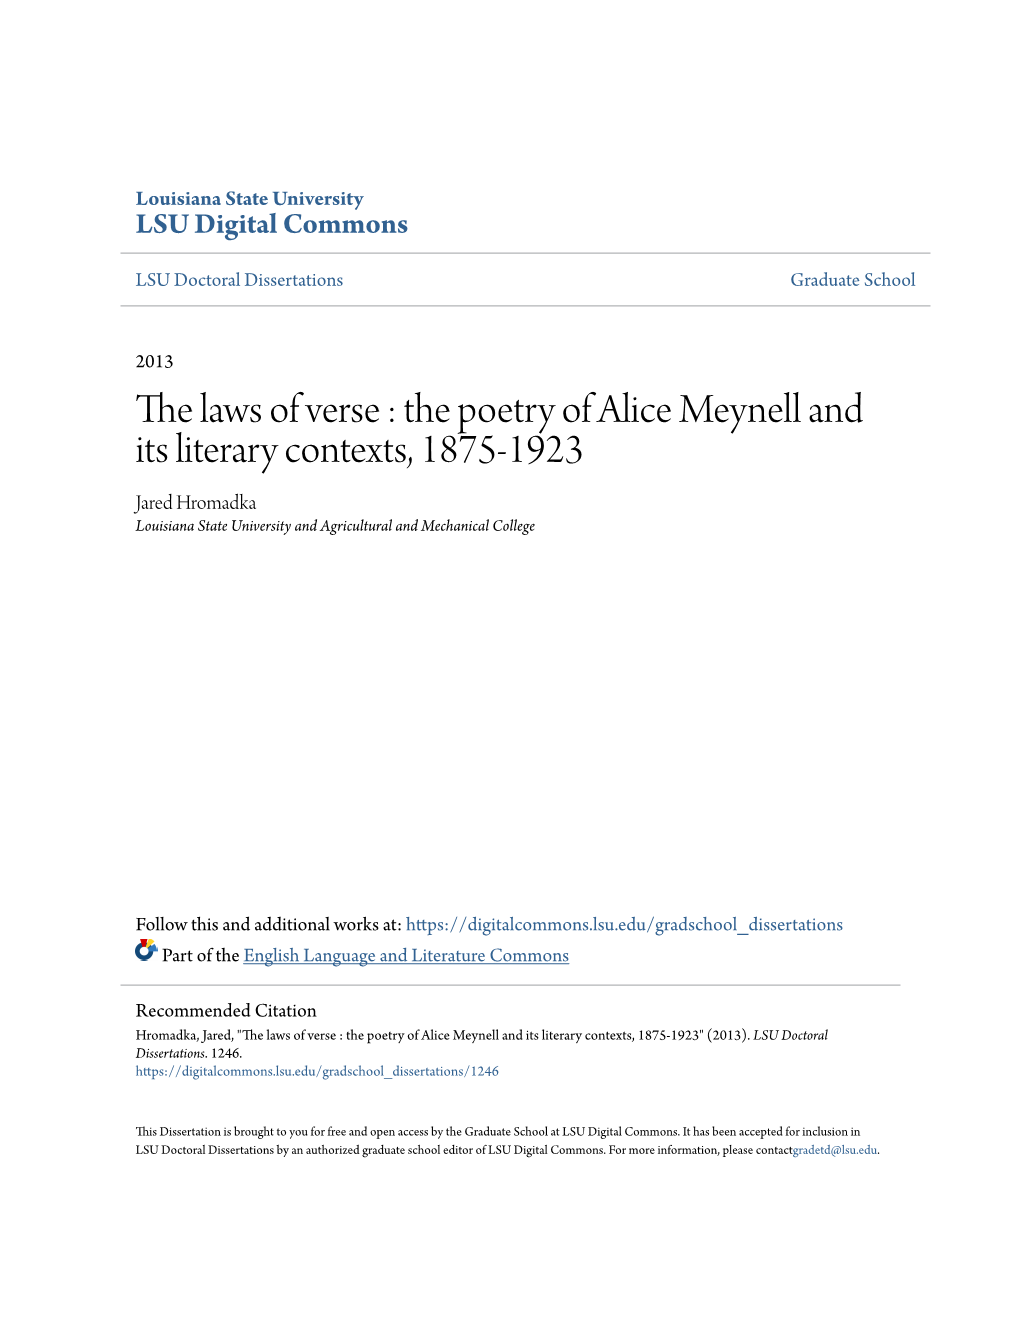 The Poetry of Alice Meynell and Its Literary Contexts, 1875-1923 Jared Hromadka Louisiana State University and Agricultural and Mechanical College